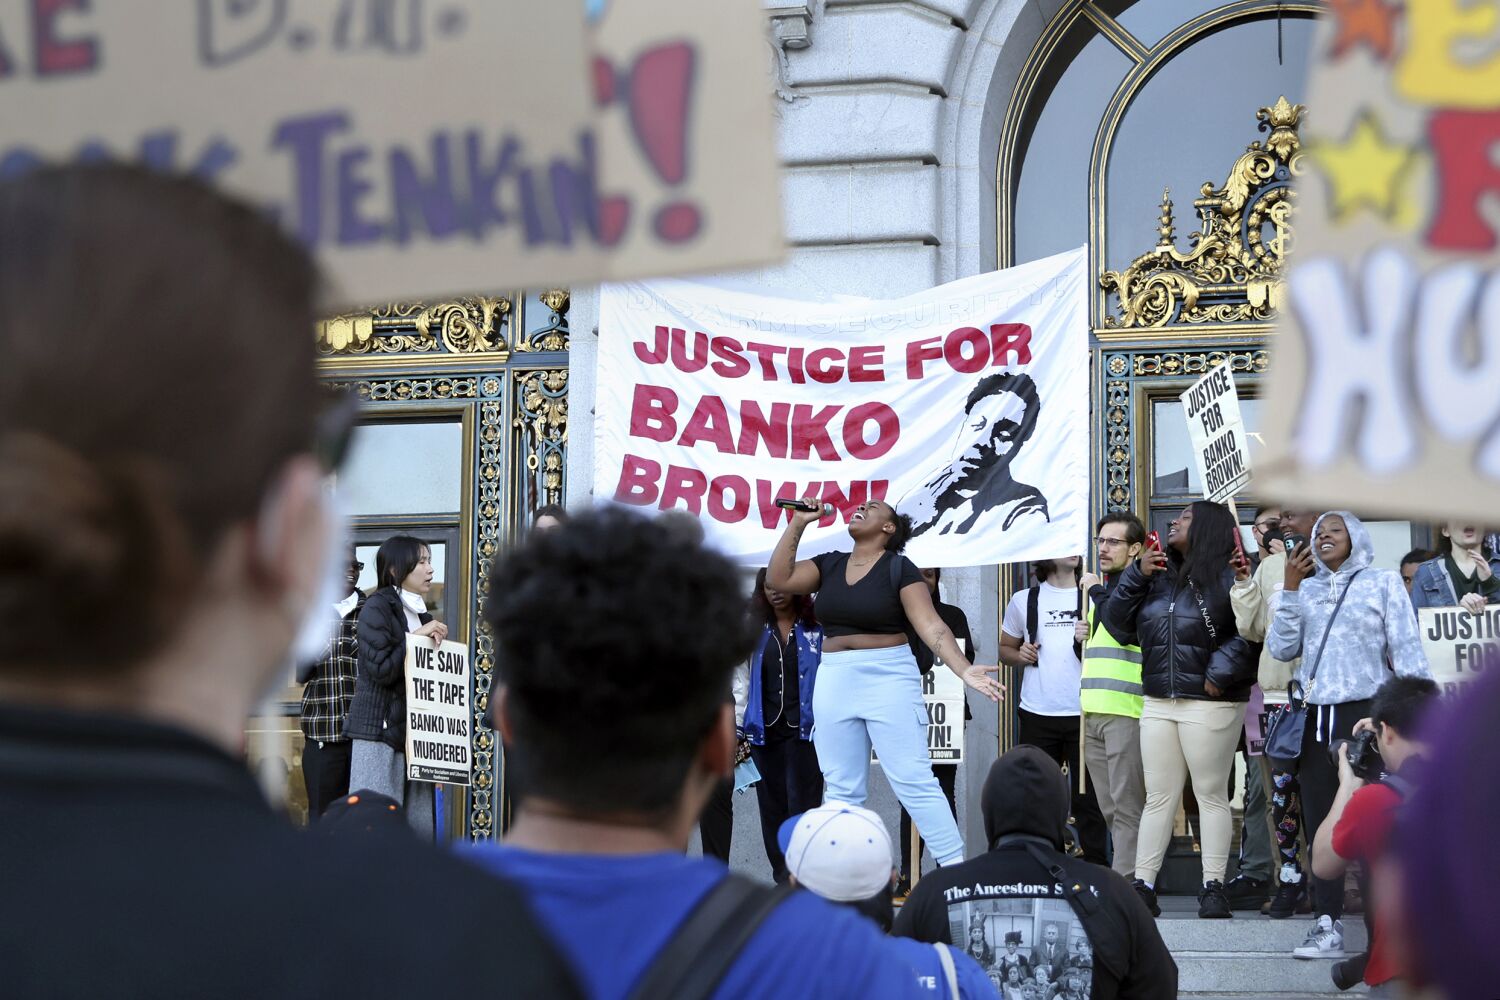 Banko Brown's family files suit against Walgreens and the security guard who shot him